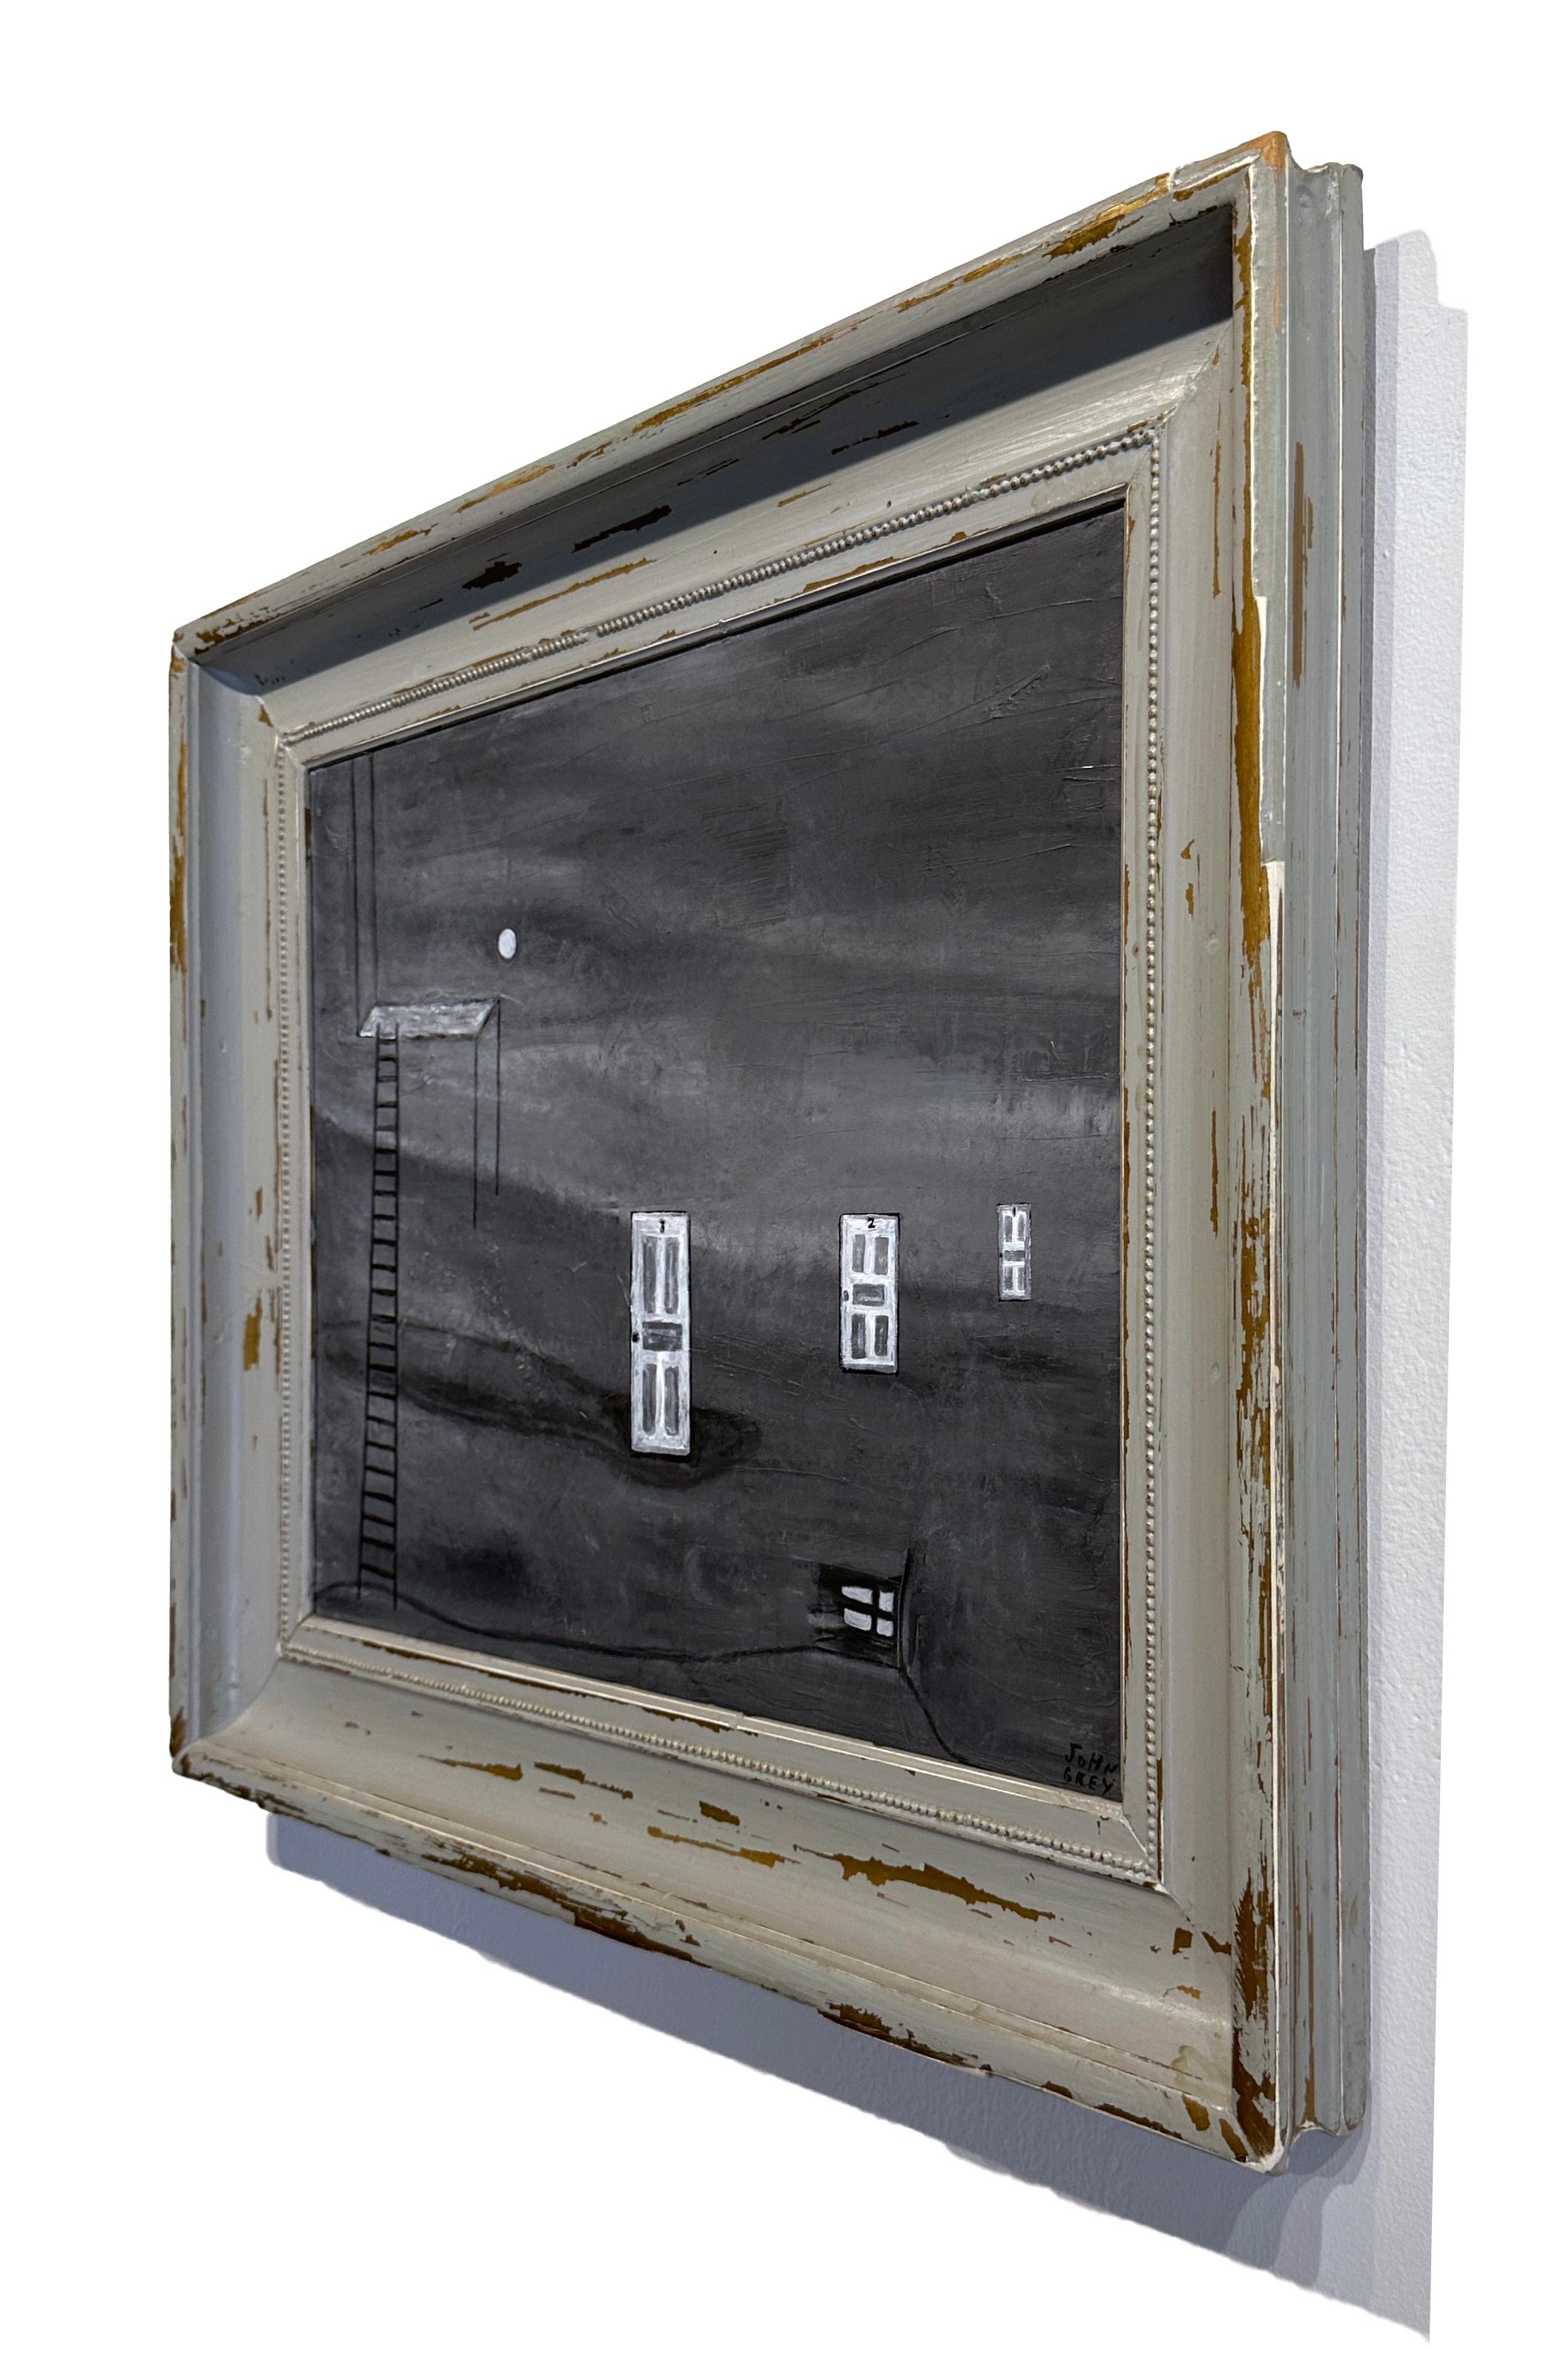 Echo - Monochromatic Scene, Ladder and Doors in Muted Gray, Original Oil, Framed - Painting by John Seubert